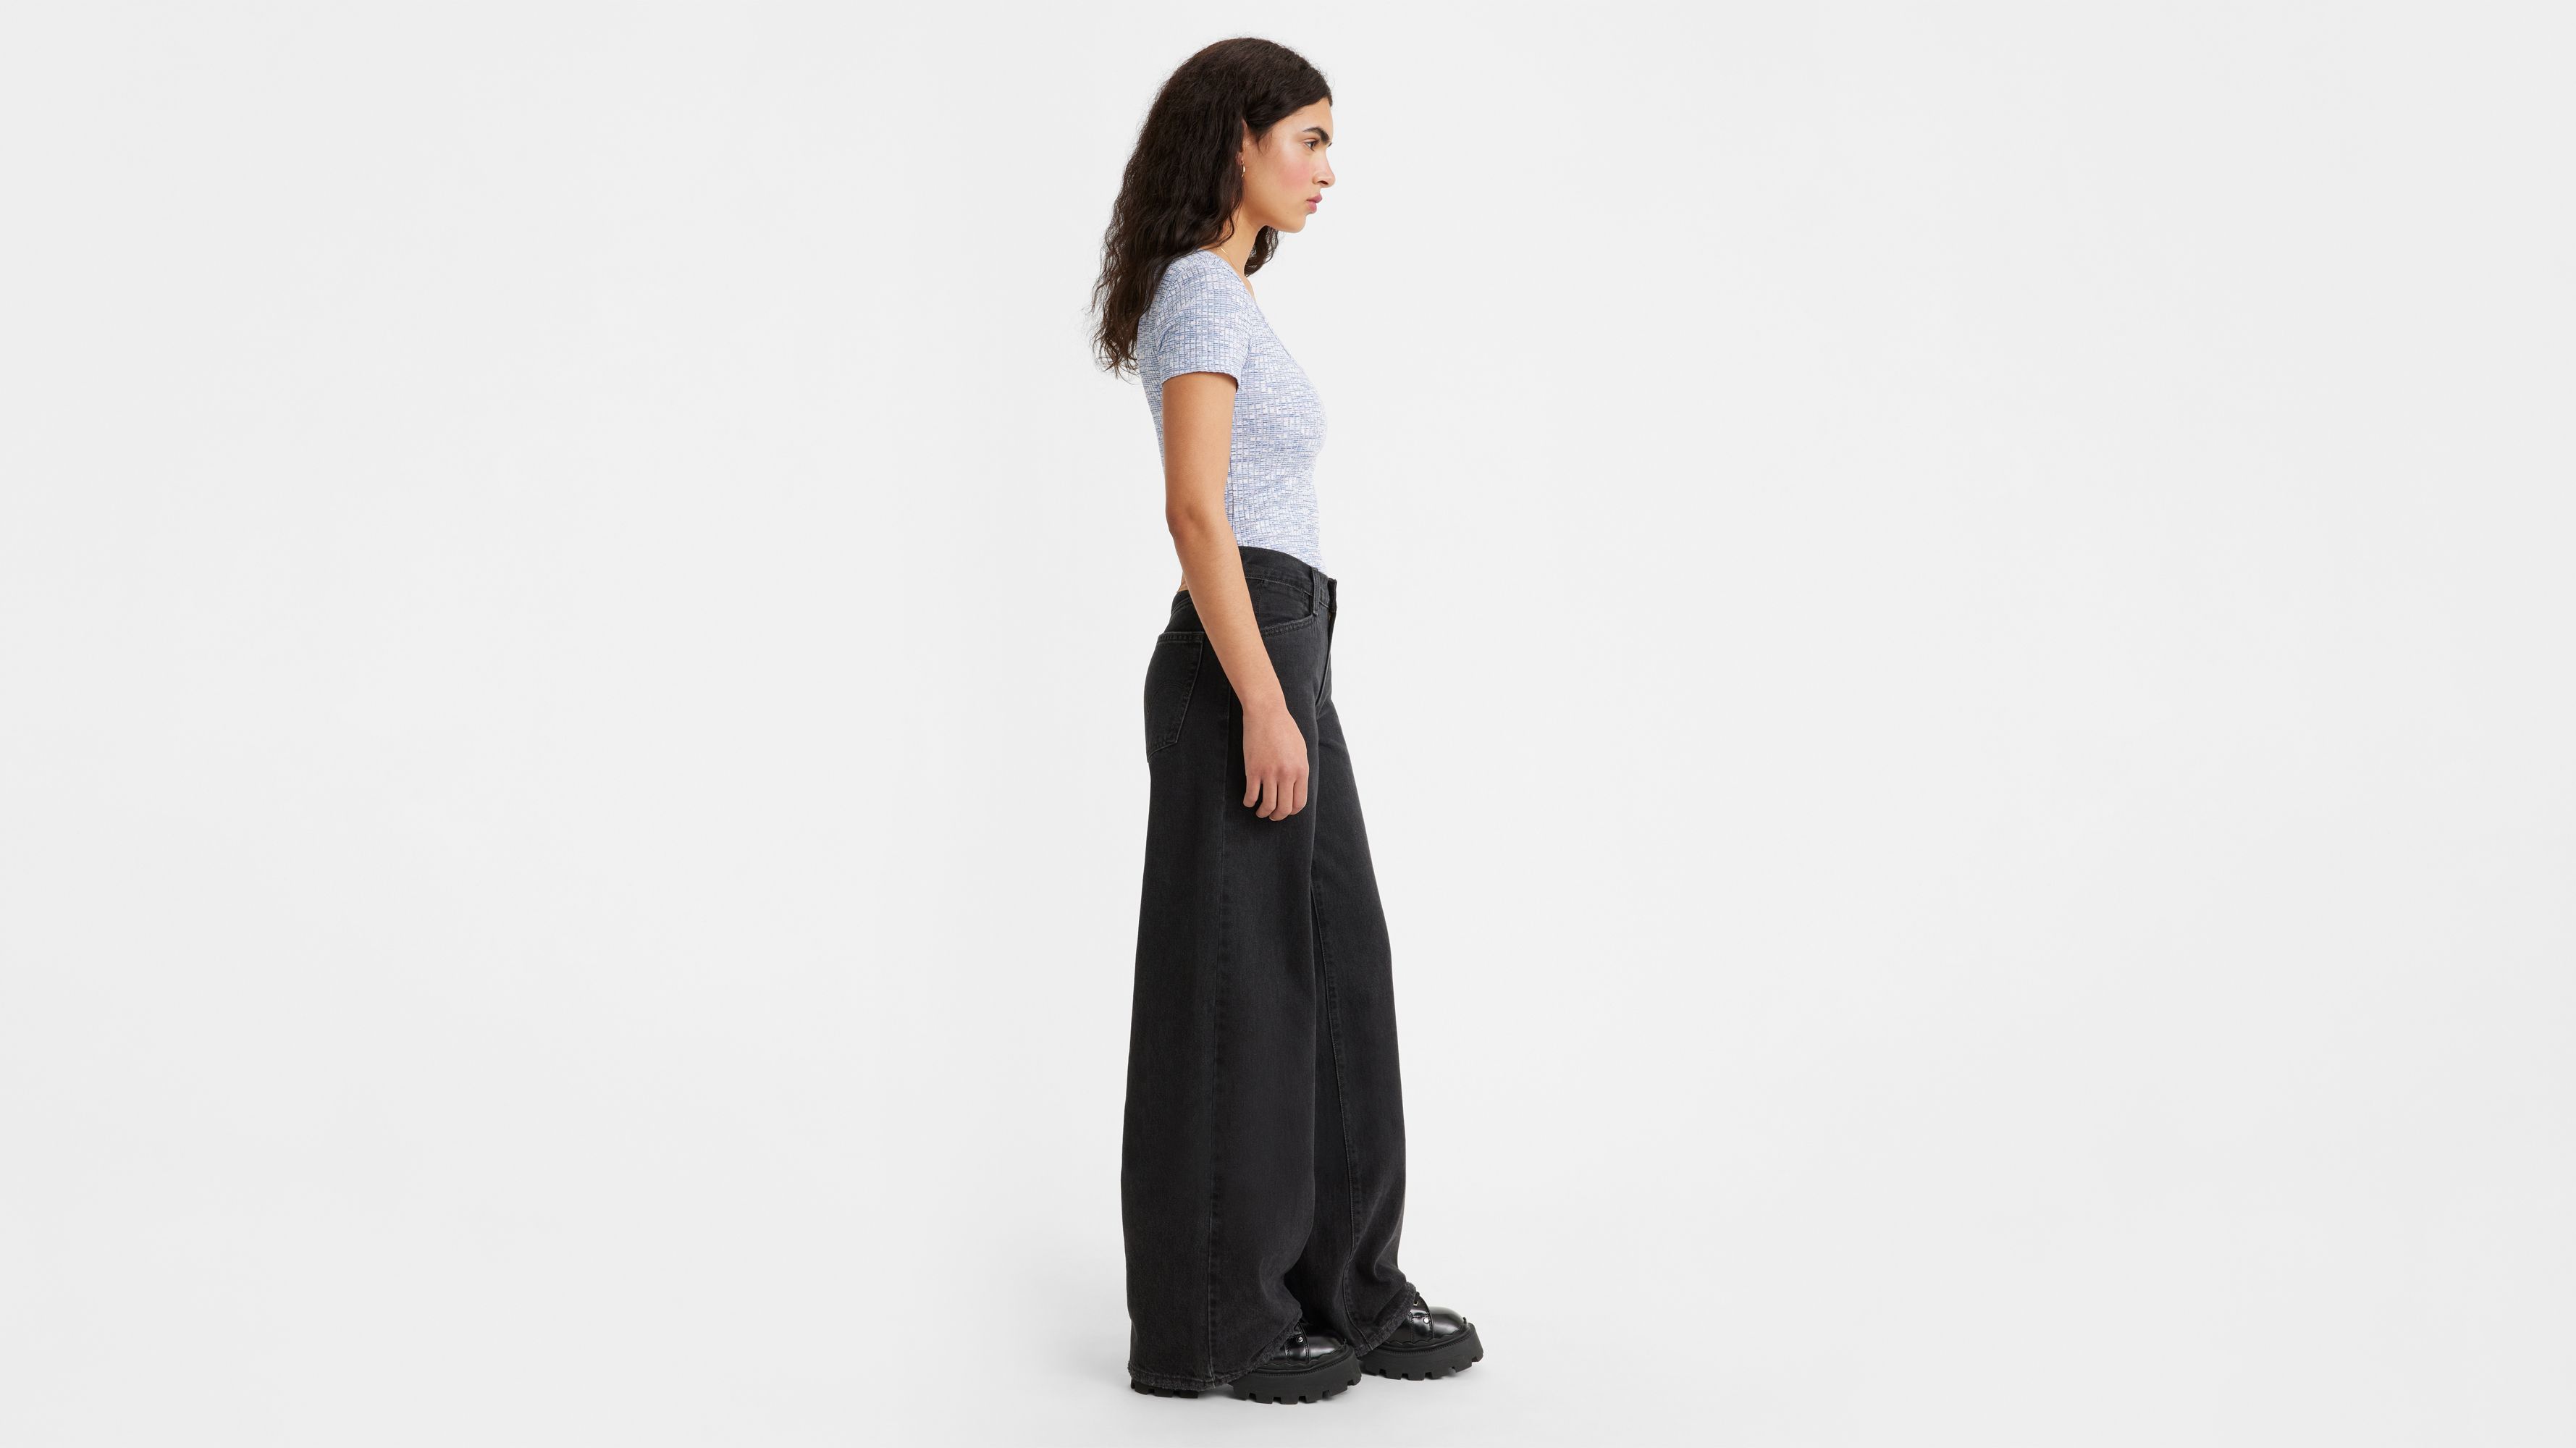 Levi's Women's 94 Baggy Wide Leg Jean (Also Available in Plus), Over  Exposure, 24 at  Women's Jeans store